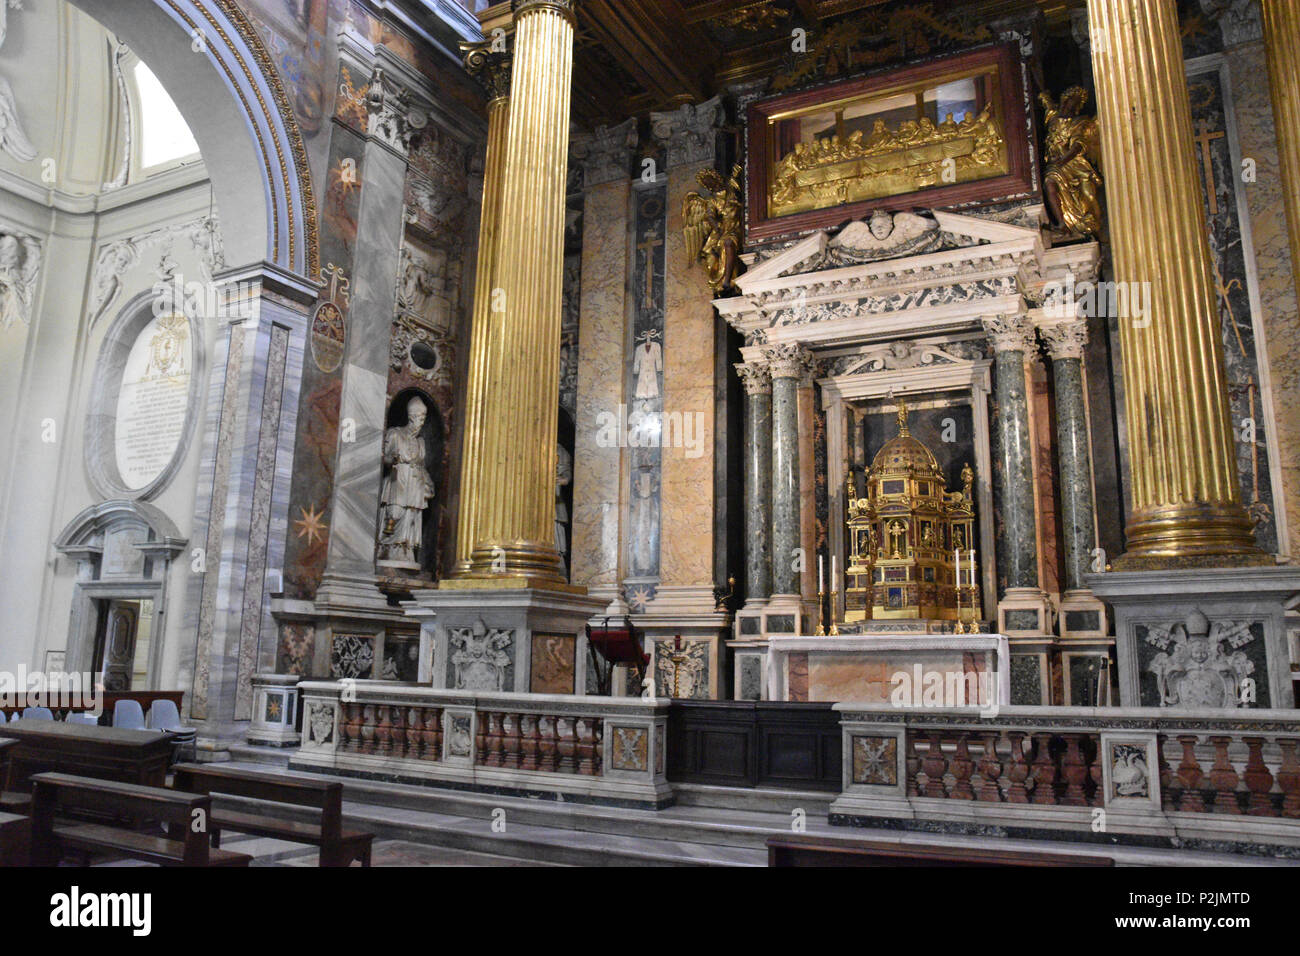 Altar of the Blessed Sacrament, Archbasilica of St. John Lateran, St ...